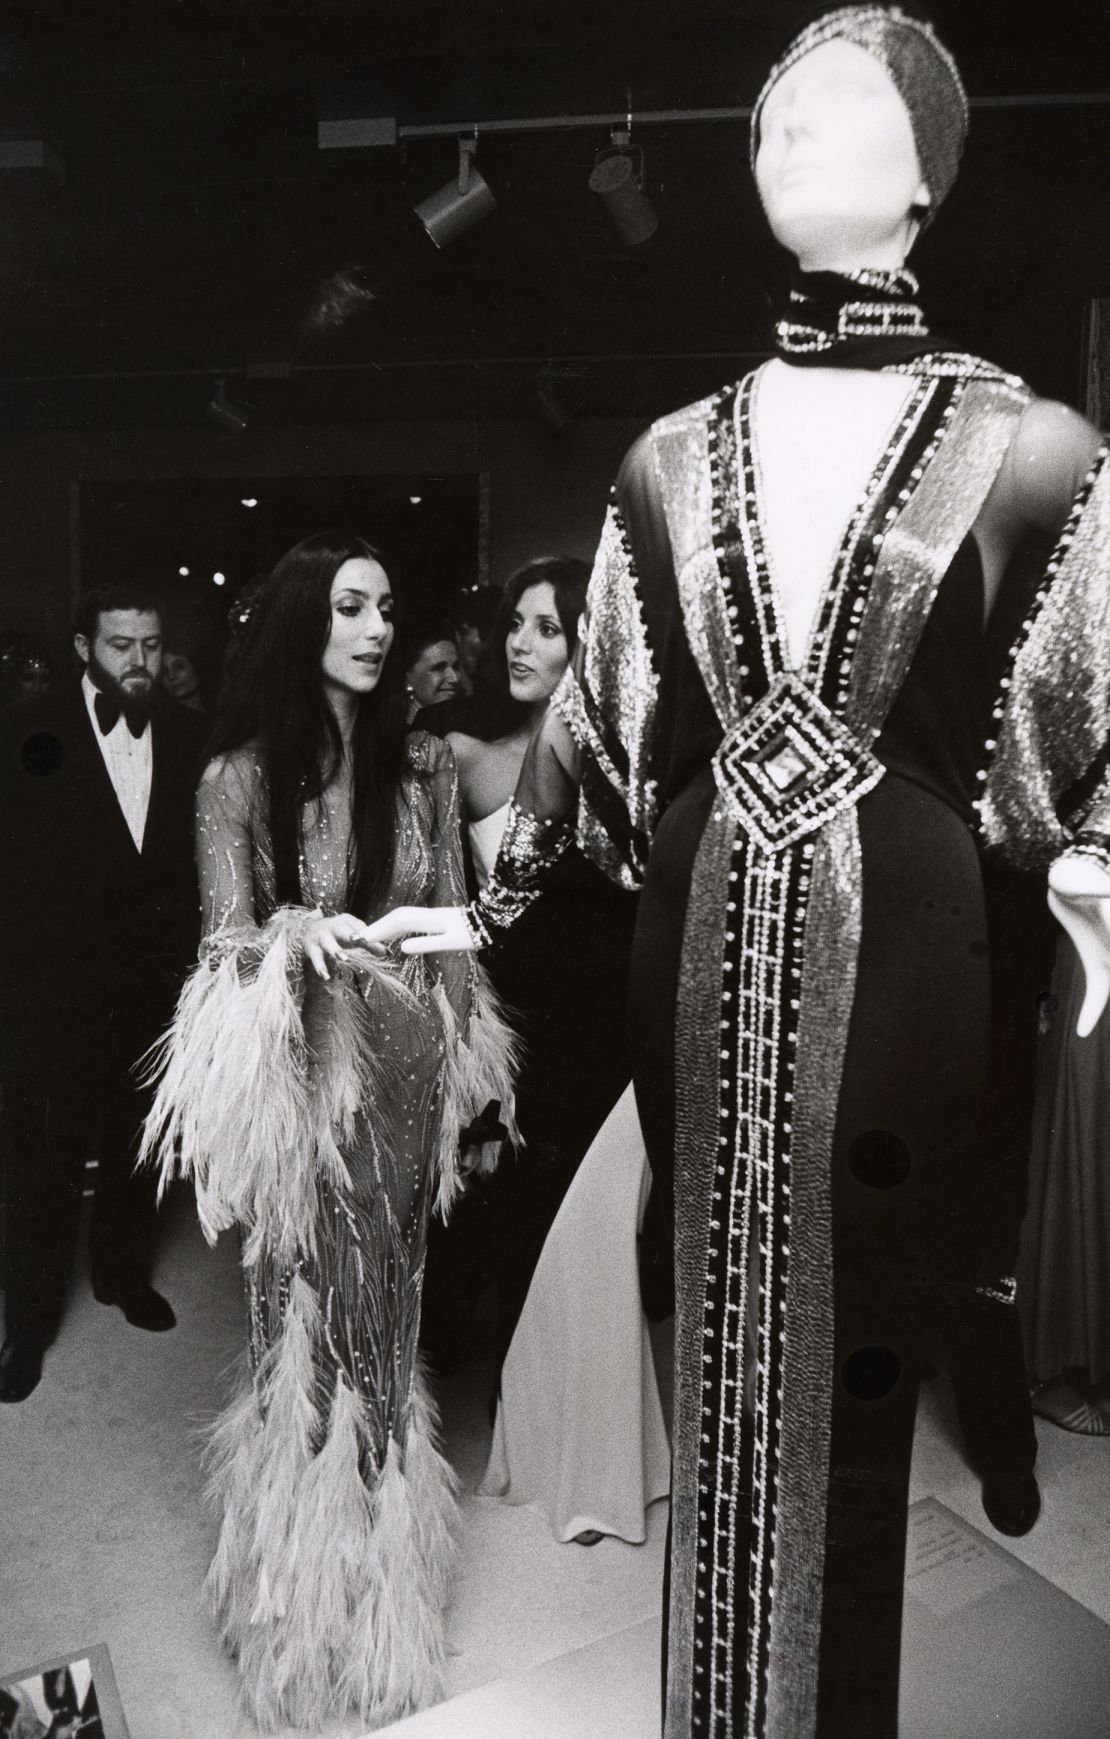 Cher attended the "Romantic and Glamorous Hollywood Design" Met Gala in 1974. (Photo by Ron Galella/Ron Galella Collection via Getty Images)